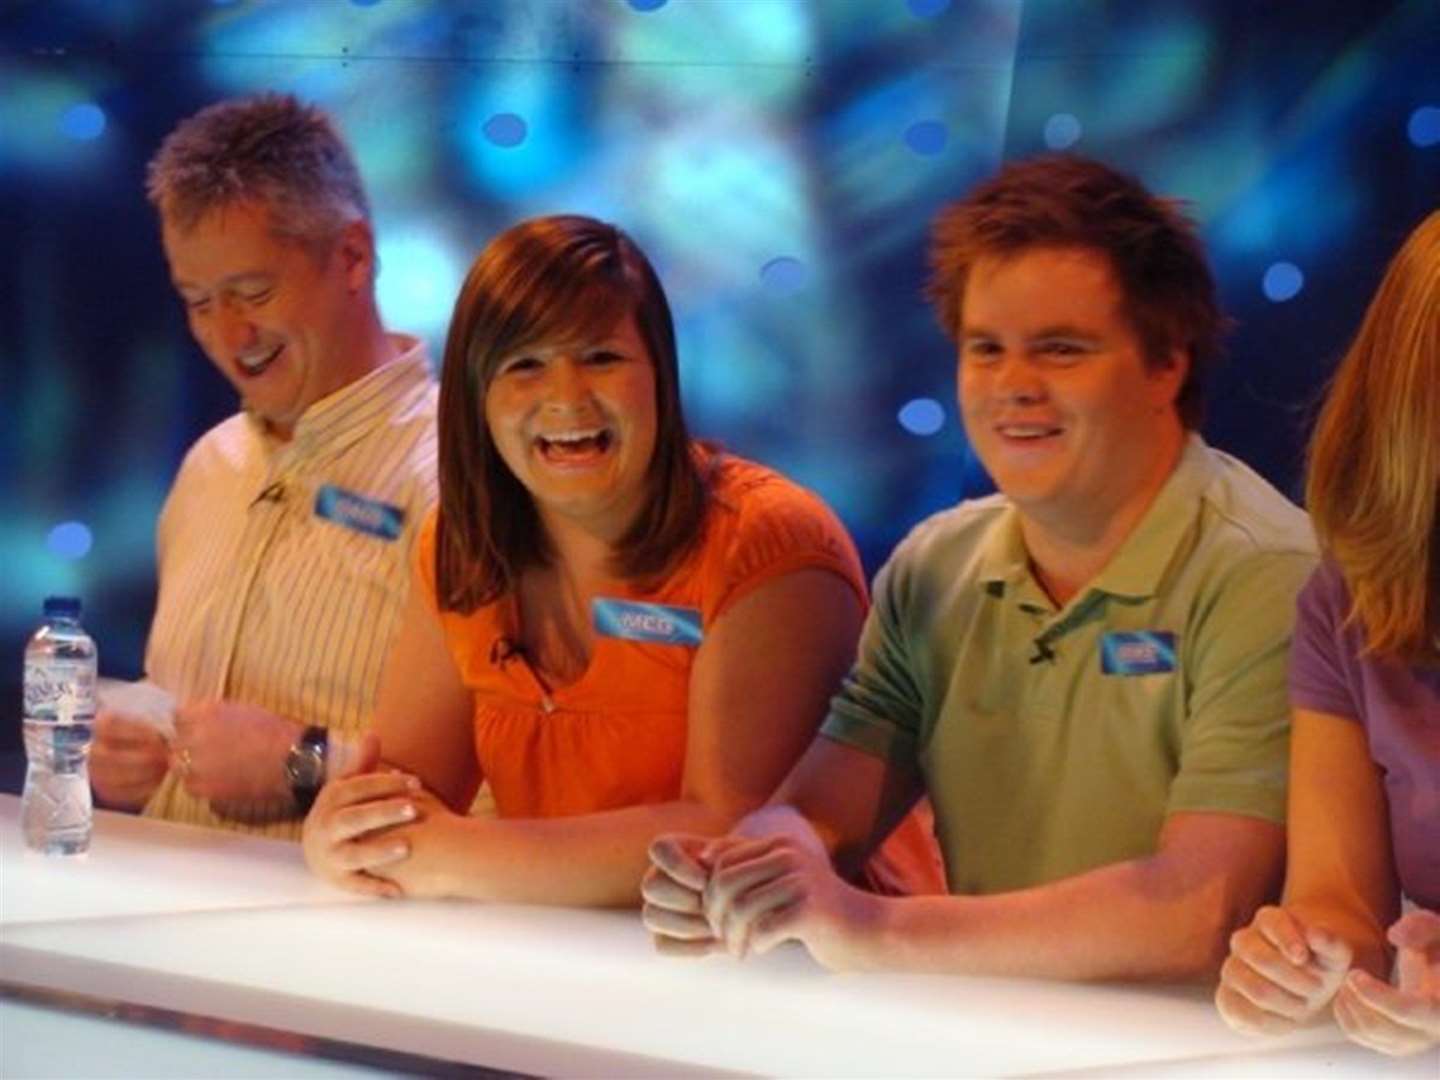 Megan Forbes (centre) appeared on quiz show Eggheads with fellow team-mates Paul Hopfensperger and Mike Cross in 2010